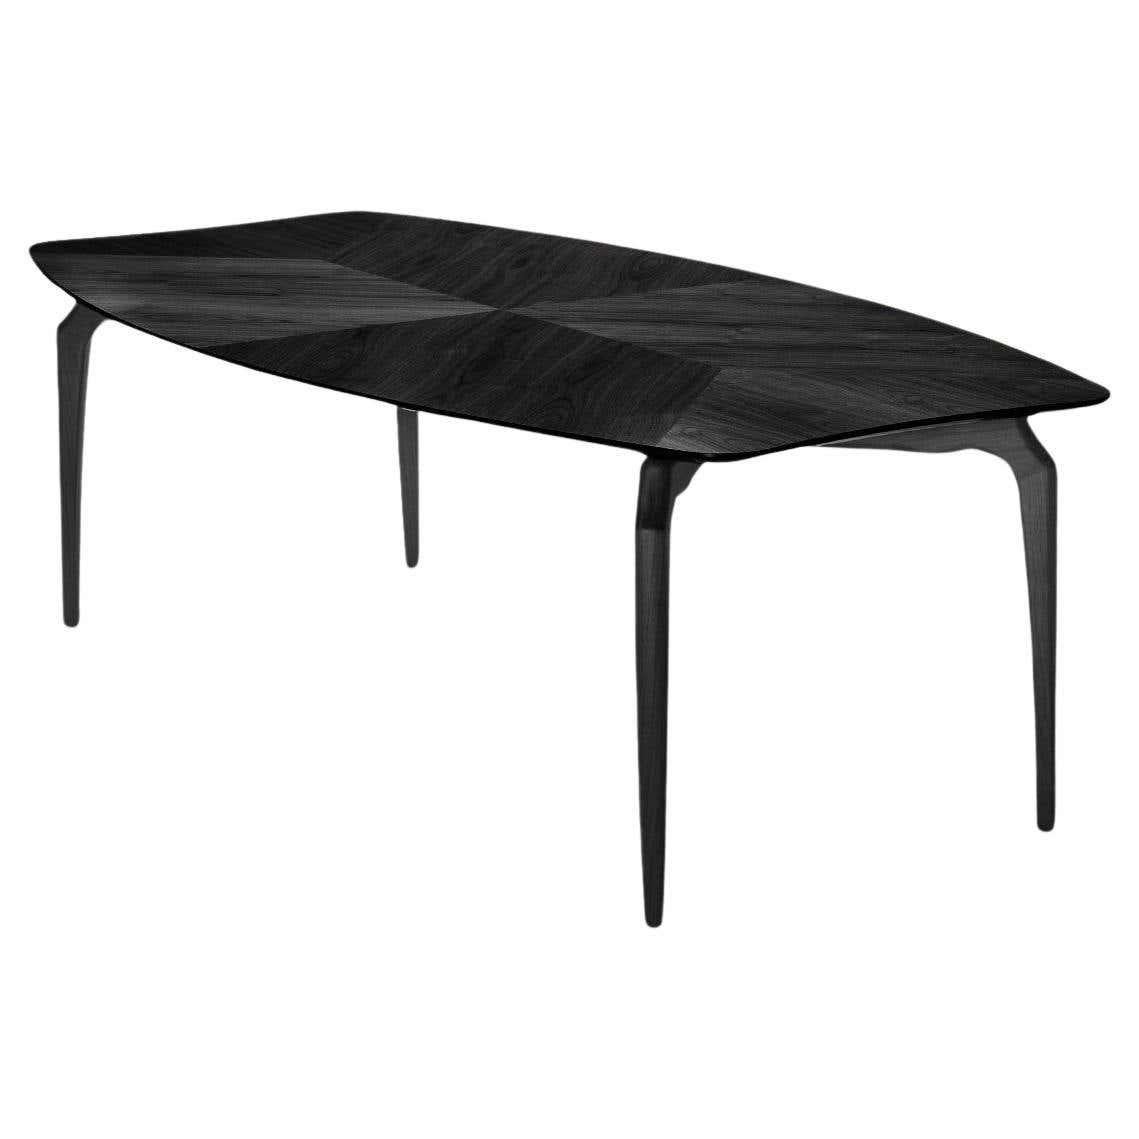 Gaulino table designed by Oscar Tusquets manufactured by BD Barcelona Design, circa 2010.

Black Stained Wood.

Oscar Tusquets, architect, artist and writer has designed nearly everything during hislong career. In particular many chairs, some of